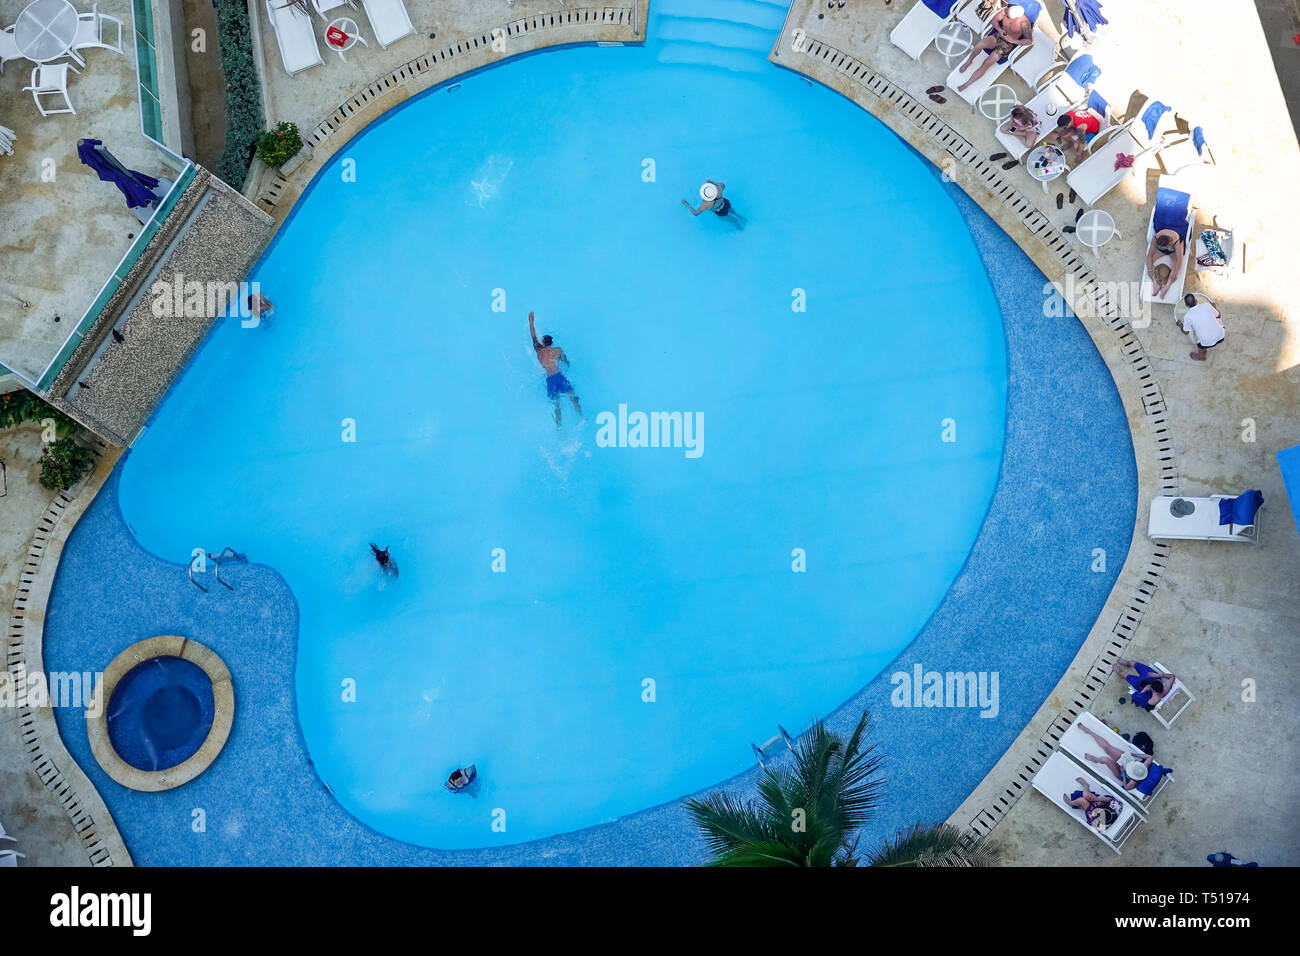 Cartagena Colombia,El Lagito,Hotel Dann,hotel,pool,amenity,Hispanic resident,residents,guests,man men male,swimming,lounging,aerial overhead view,COL1 Stock Photo